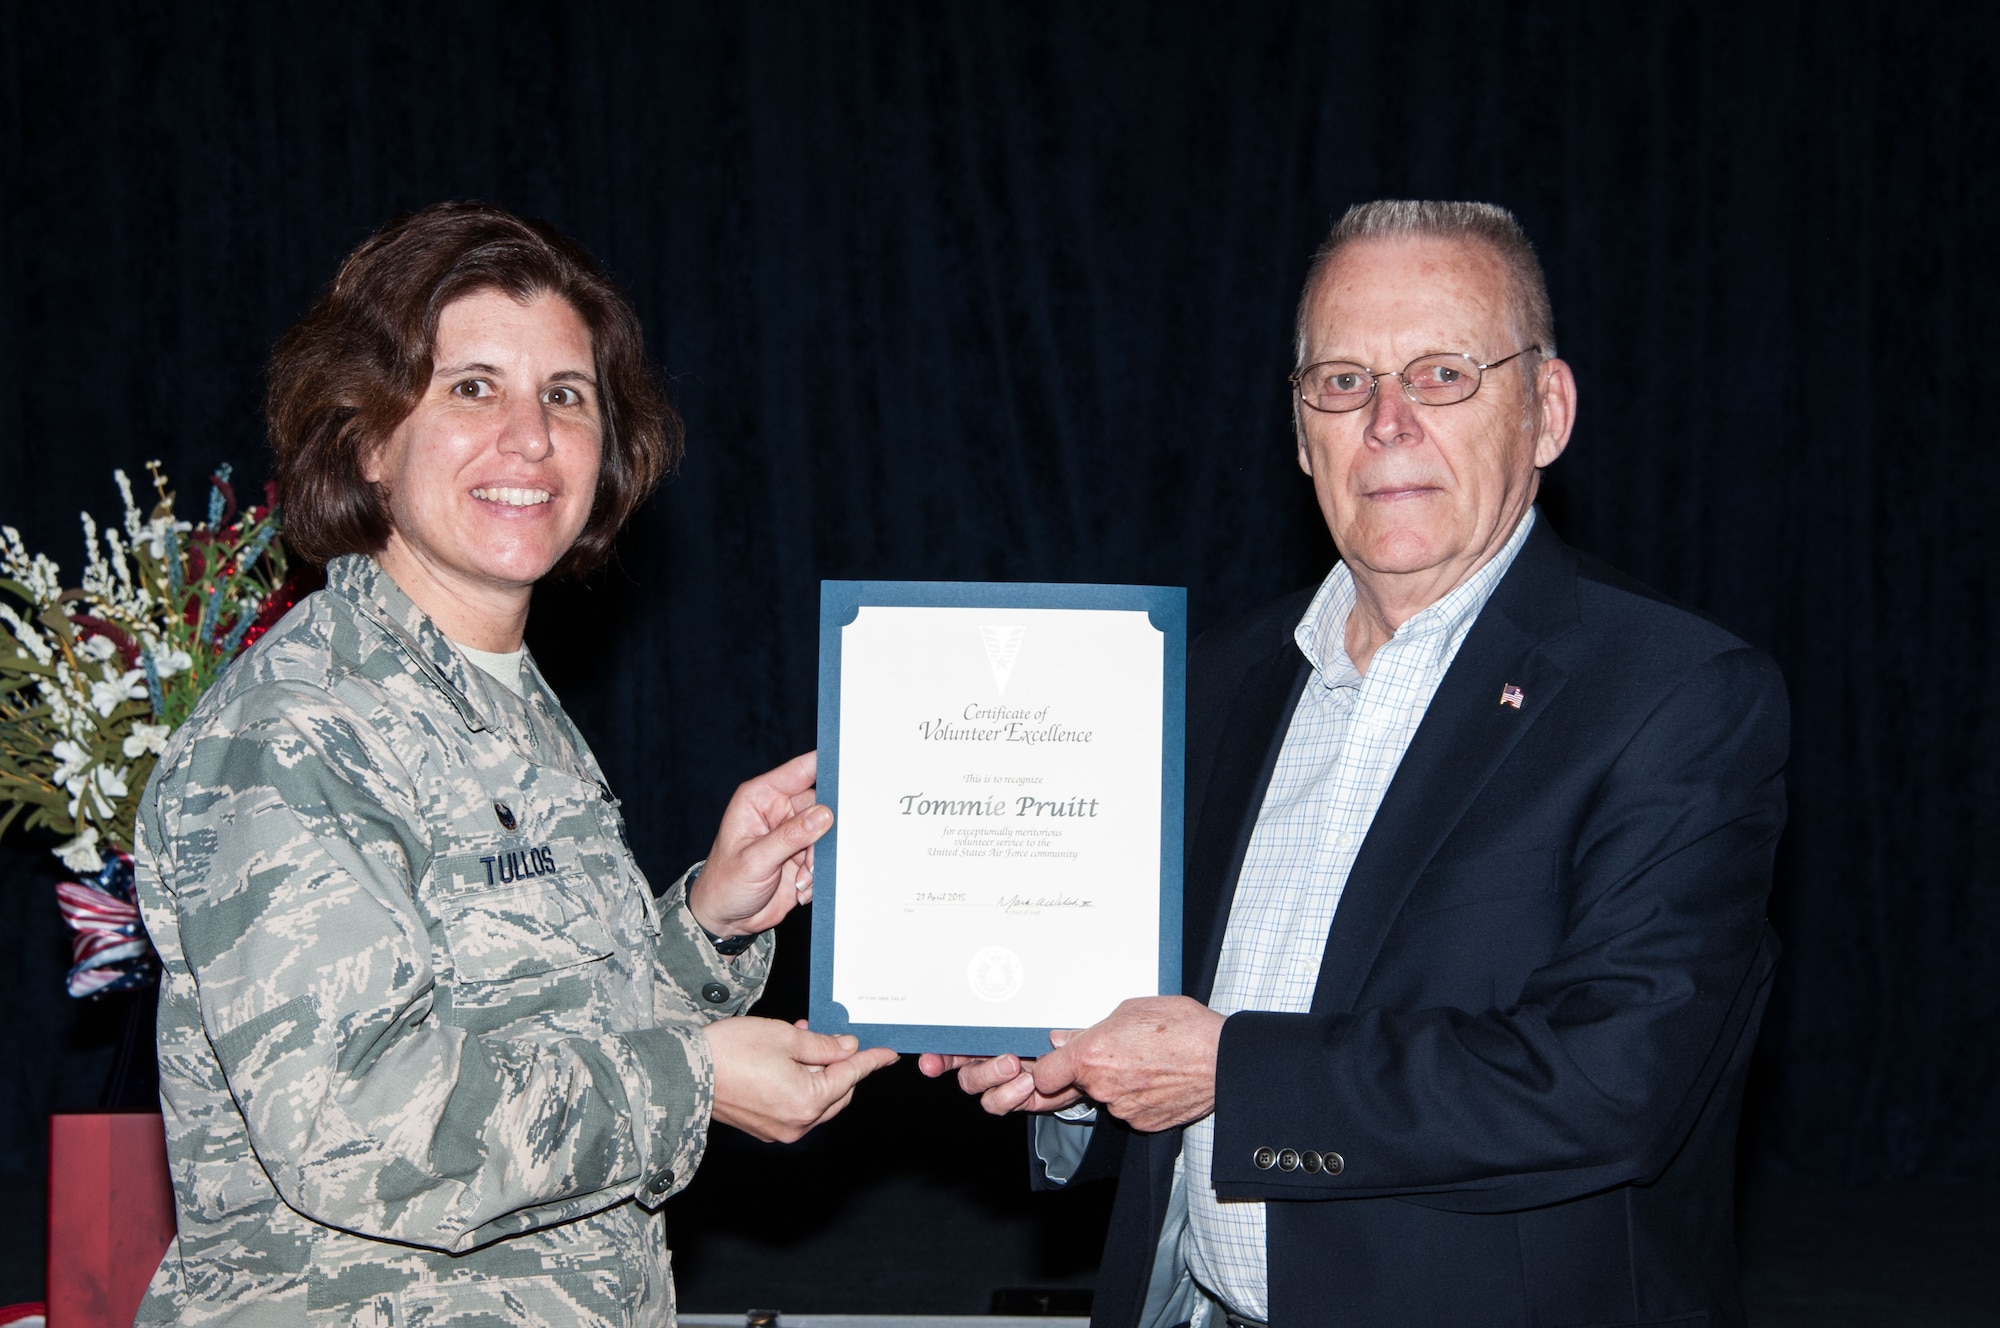 Col. Andrea Tullos, 42nd Air Base Wing commander, presents the Volunteer Excellence Award to retired Chief Master Sgt. Tommie Pruitt. Pruitt has been volunteering at the Gunter pharmacy for 15 years, clocking in about 500 hours a year. (U.S. Air Force photo by Henry Hancock/Cleared)